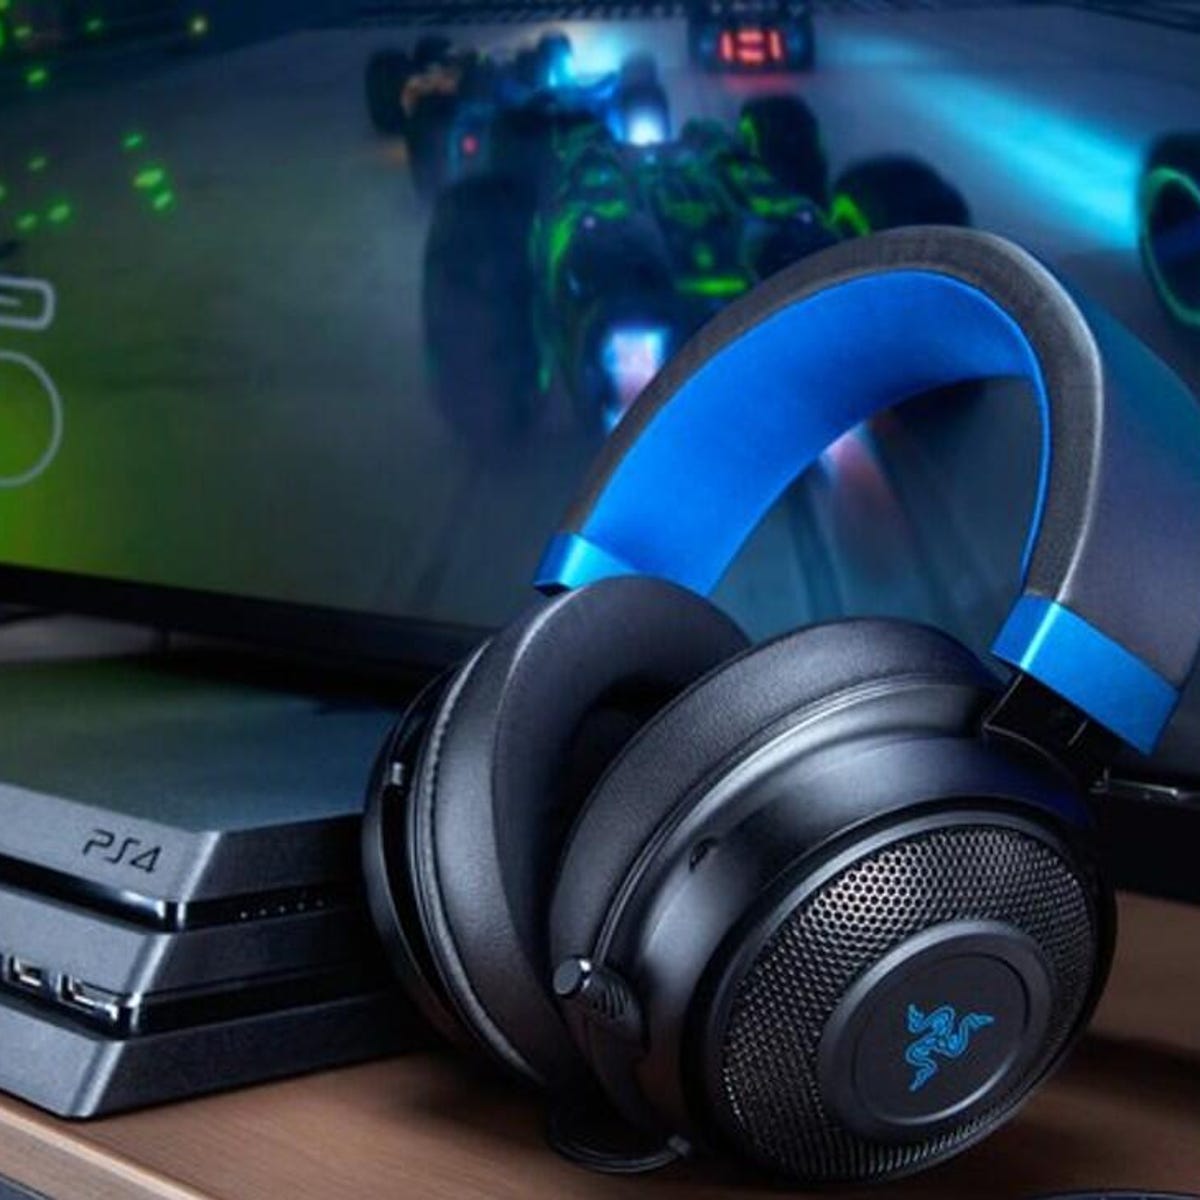 The 5 best PC gaming headsets of 2022 | ZDNET